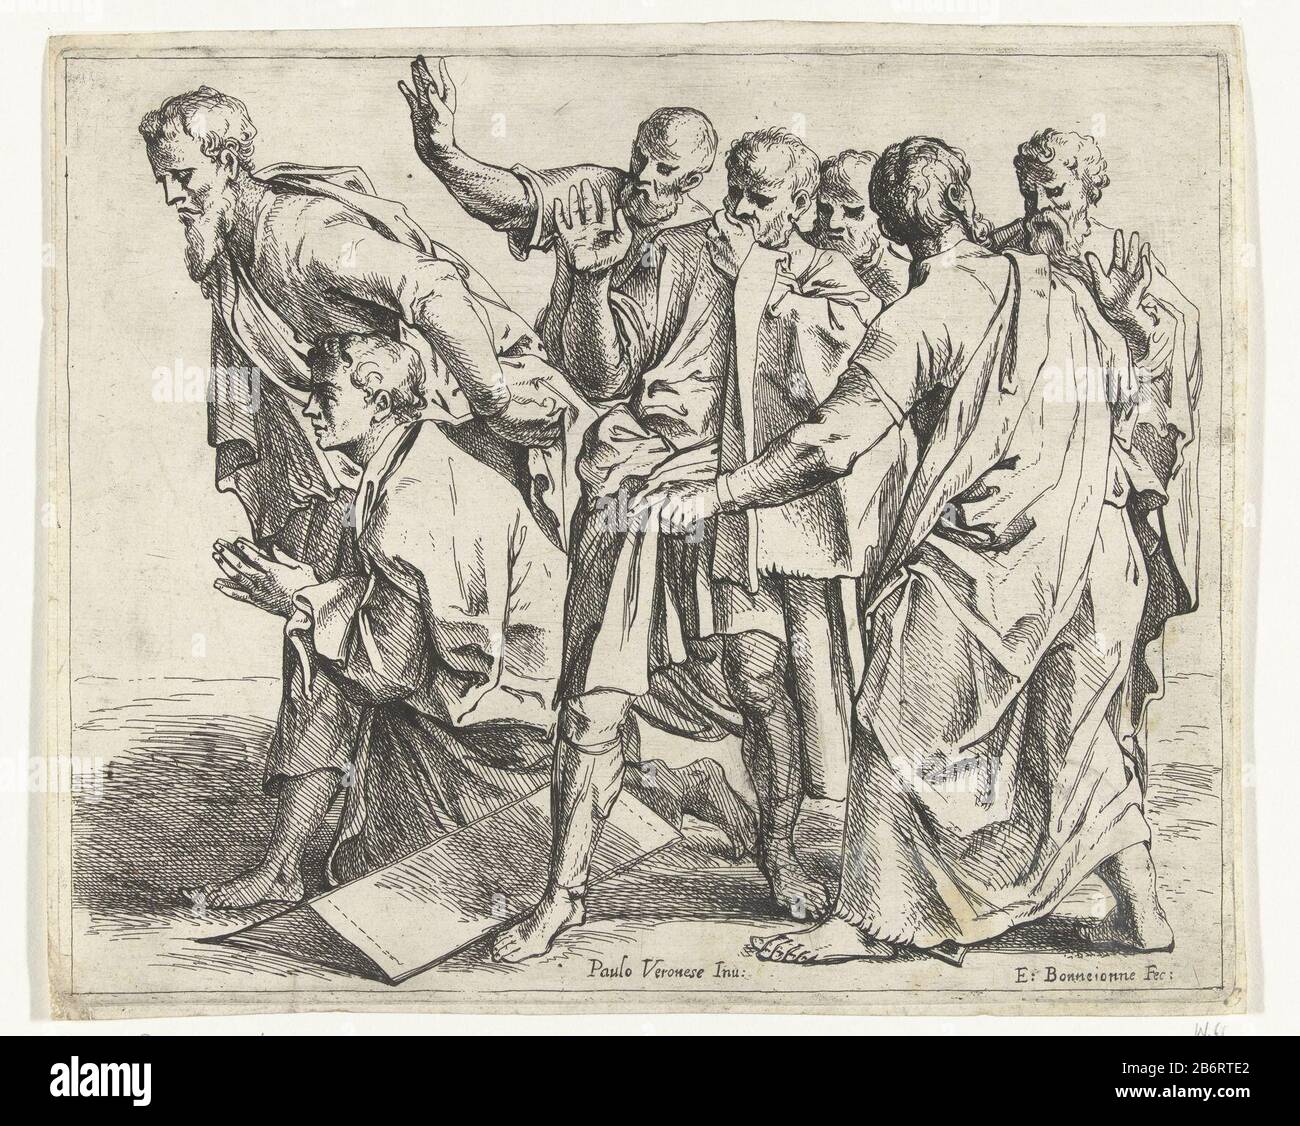 Groep mannen Seven men, possibly apostles , look to the left. They look shocked. One of the men (John) falls to his knees and bidt. Manufacturer : printmaker Eloy Bonn Jonne (listed building), designed by Paolo Veronese (listed property) Date: ca. 1640 - 1695 Physical features: etching material: paper Technique : etching dimensions: plate edge b 246 mm × h 202 mm Subject: Incredulityhuman races; peoples; nationalities (+ one) Surprise, Wonder; 'Maraviglia '(Ripa) Stock Photo